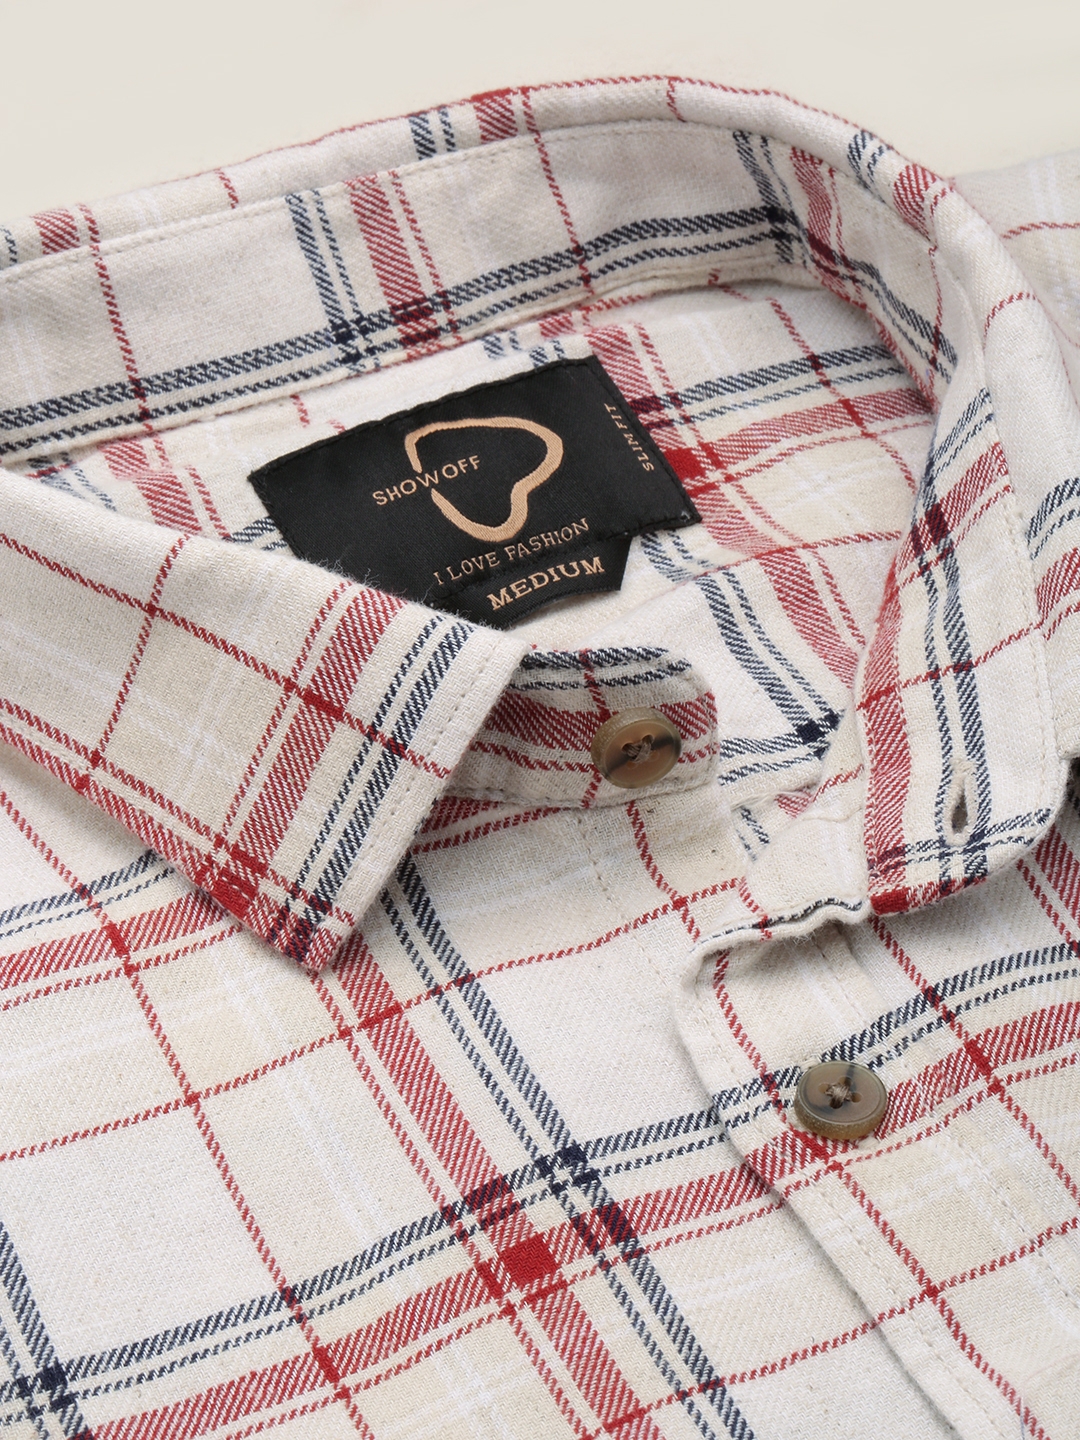 Showoff | SHOWOFF Men's Spread Collar Checked Beige Classic Shirt 5